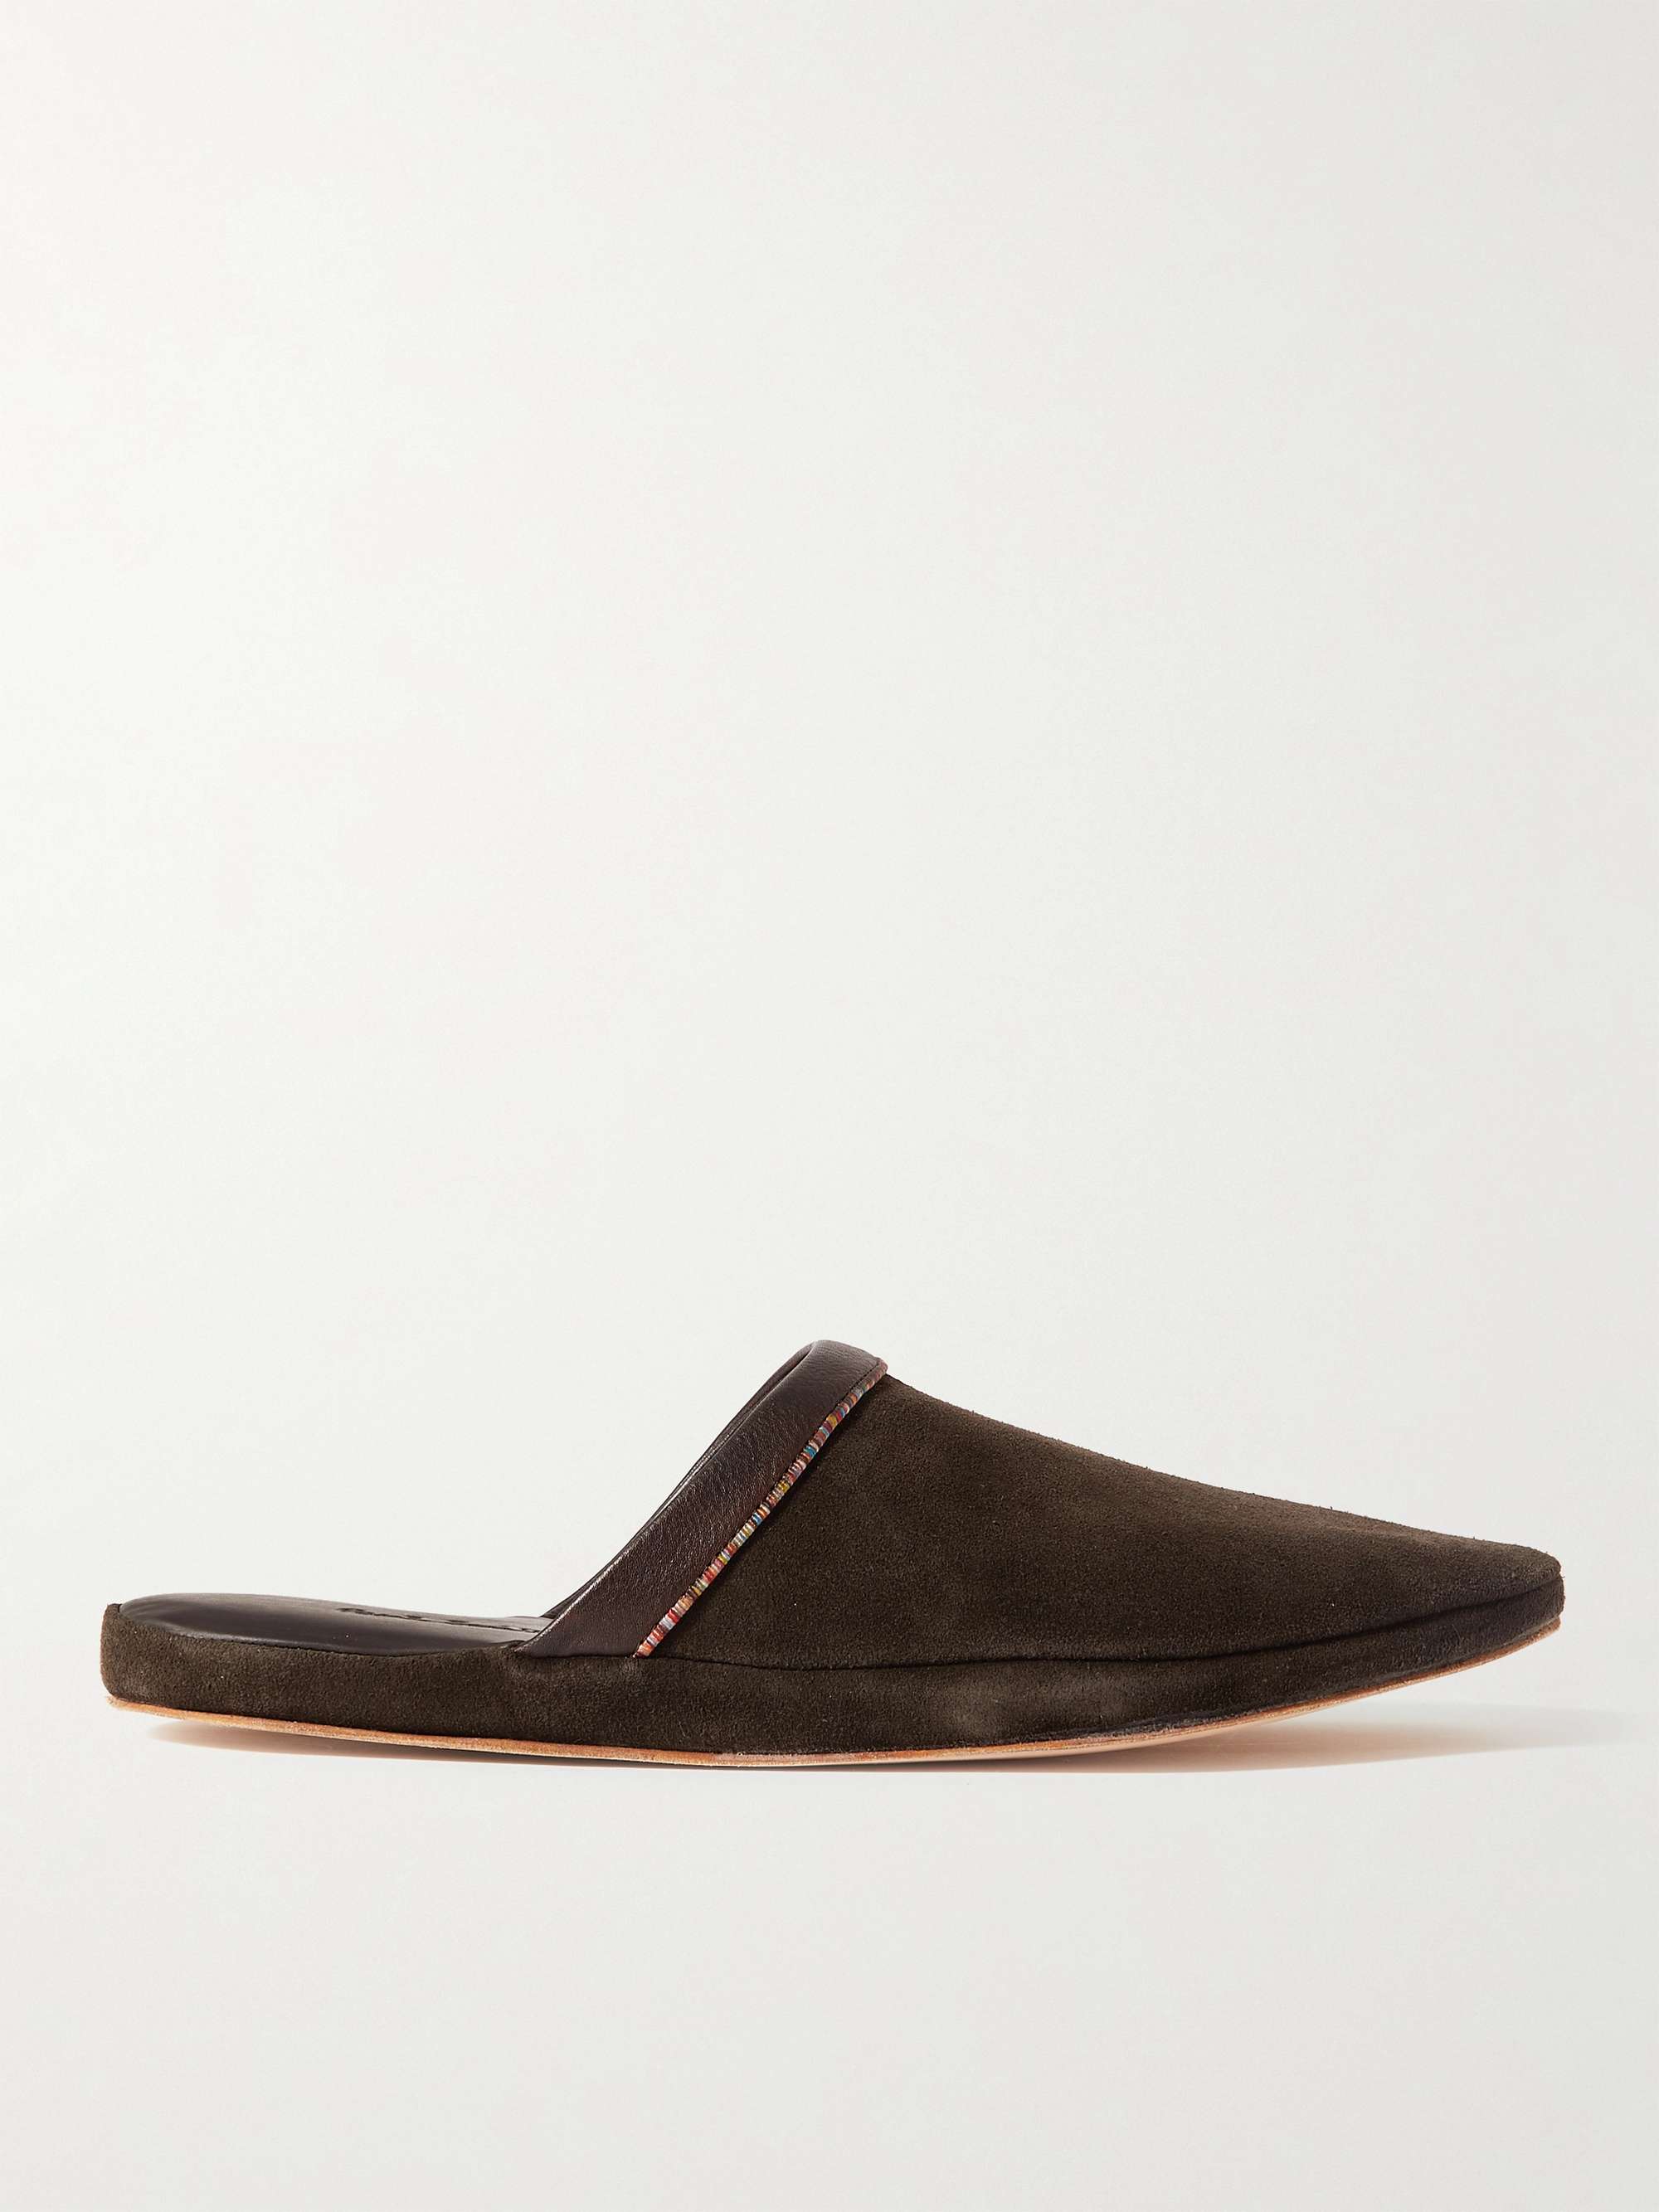 PAUL SMITH Striped Leather-Trimmed Suede Slippers for Men | MR PORTER